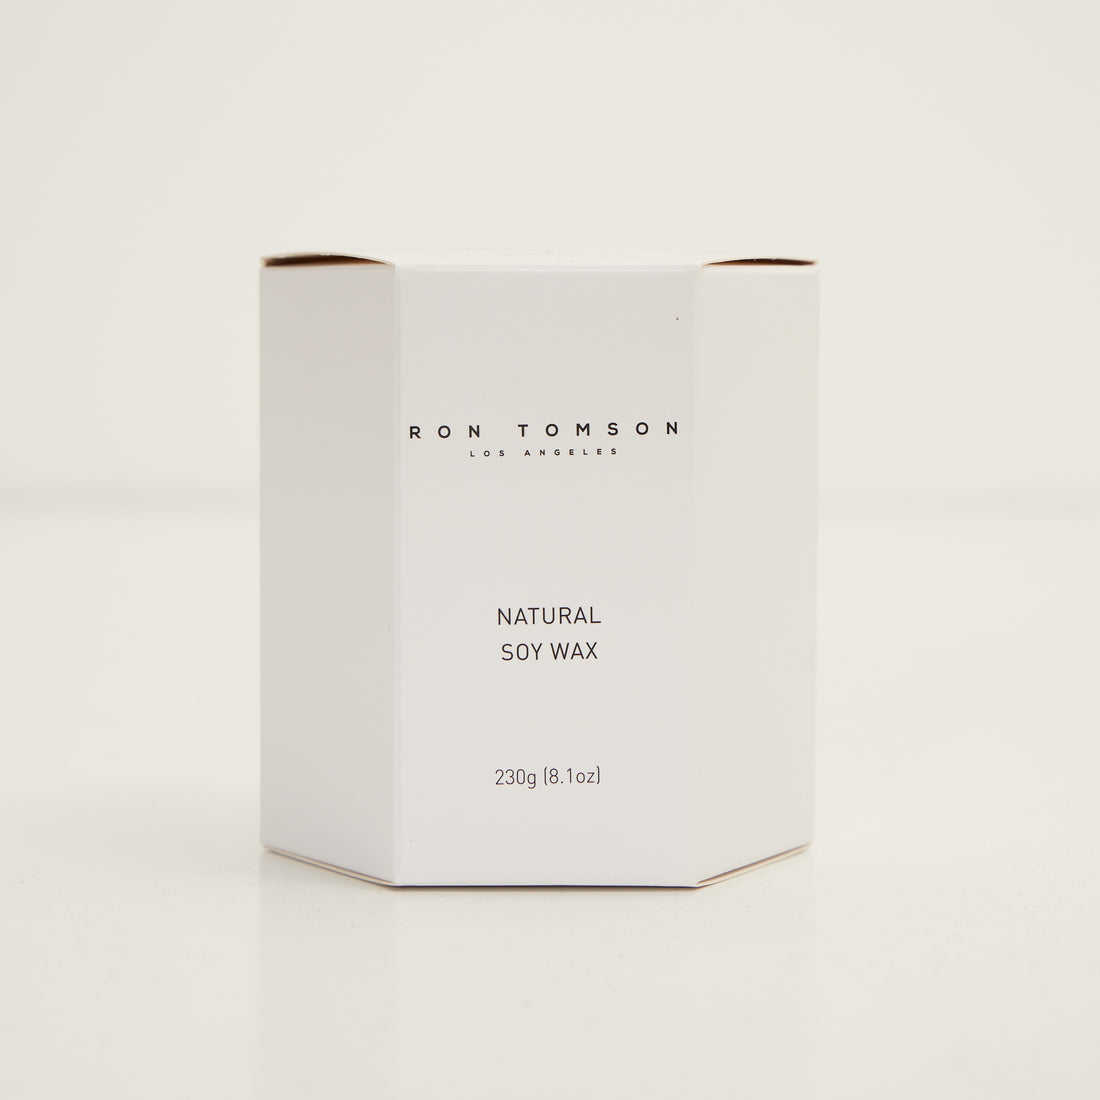 PURE SOY WAX CANDLE - WHITE TEA